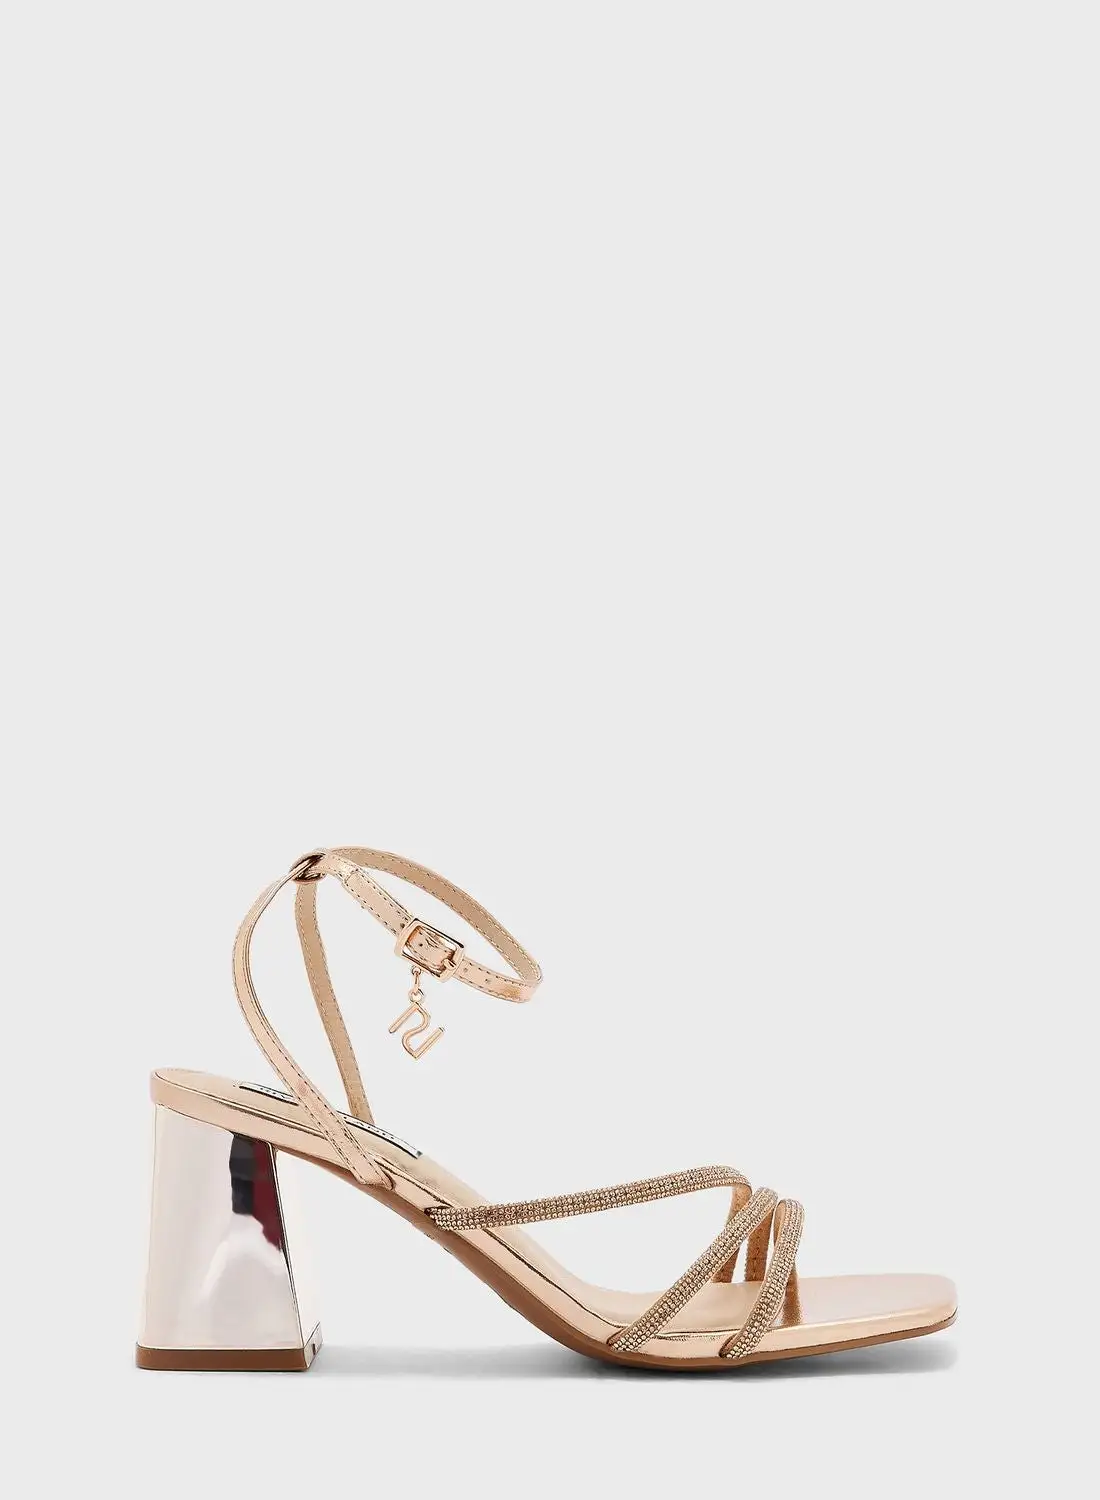 RIVER ISLAND Strappy Block Heeled Sandals